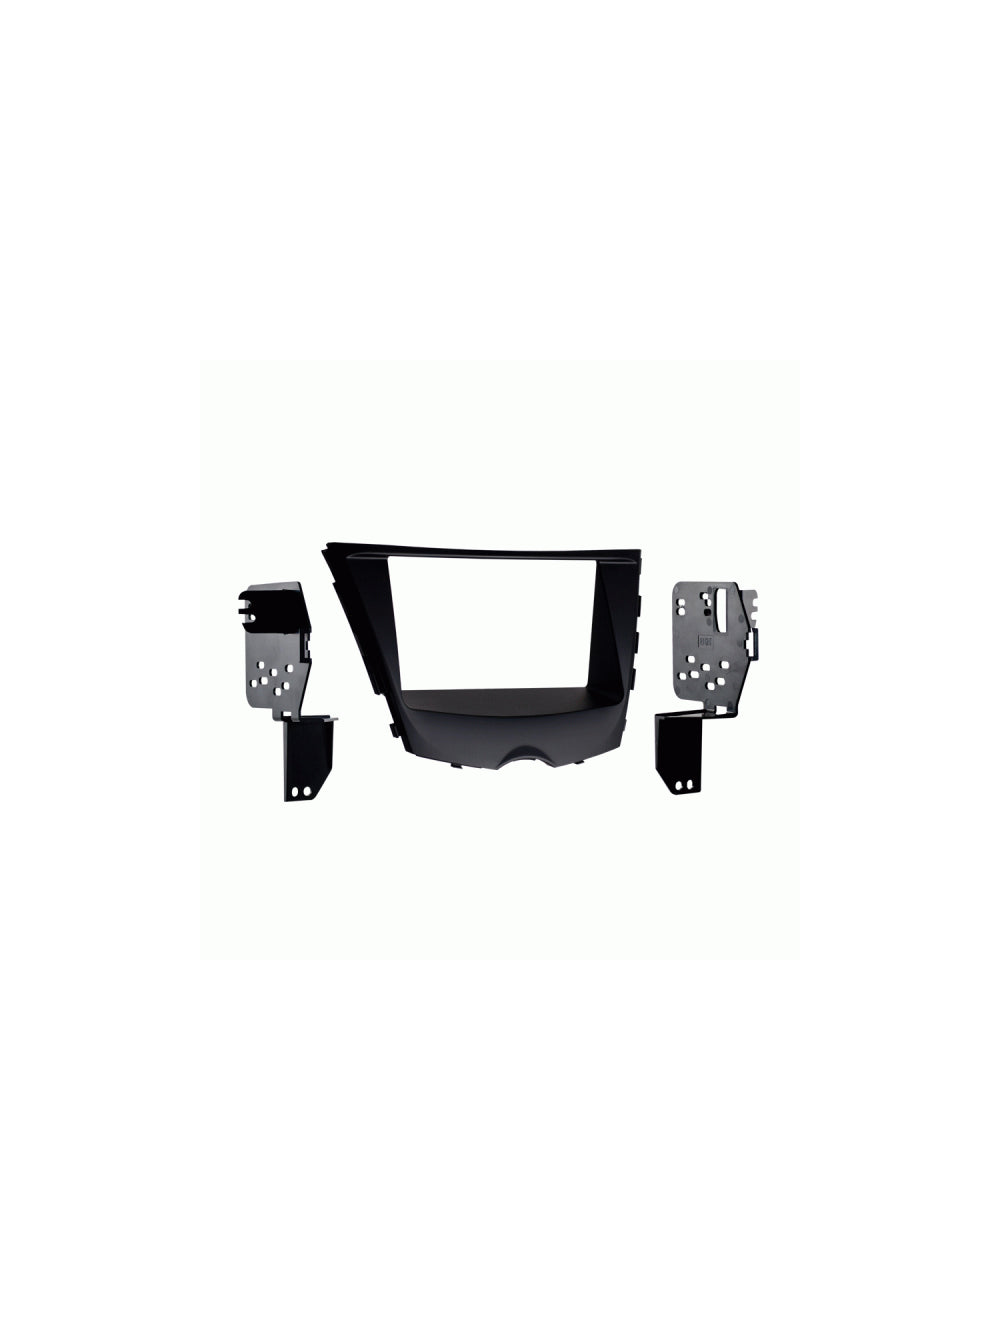 Metra 95-7350B Double DIN Installation Kit for 2012-Up Hyundai Veloster